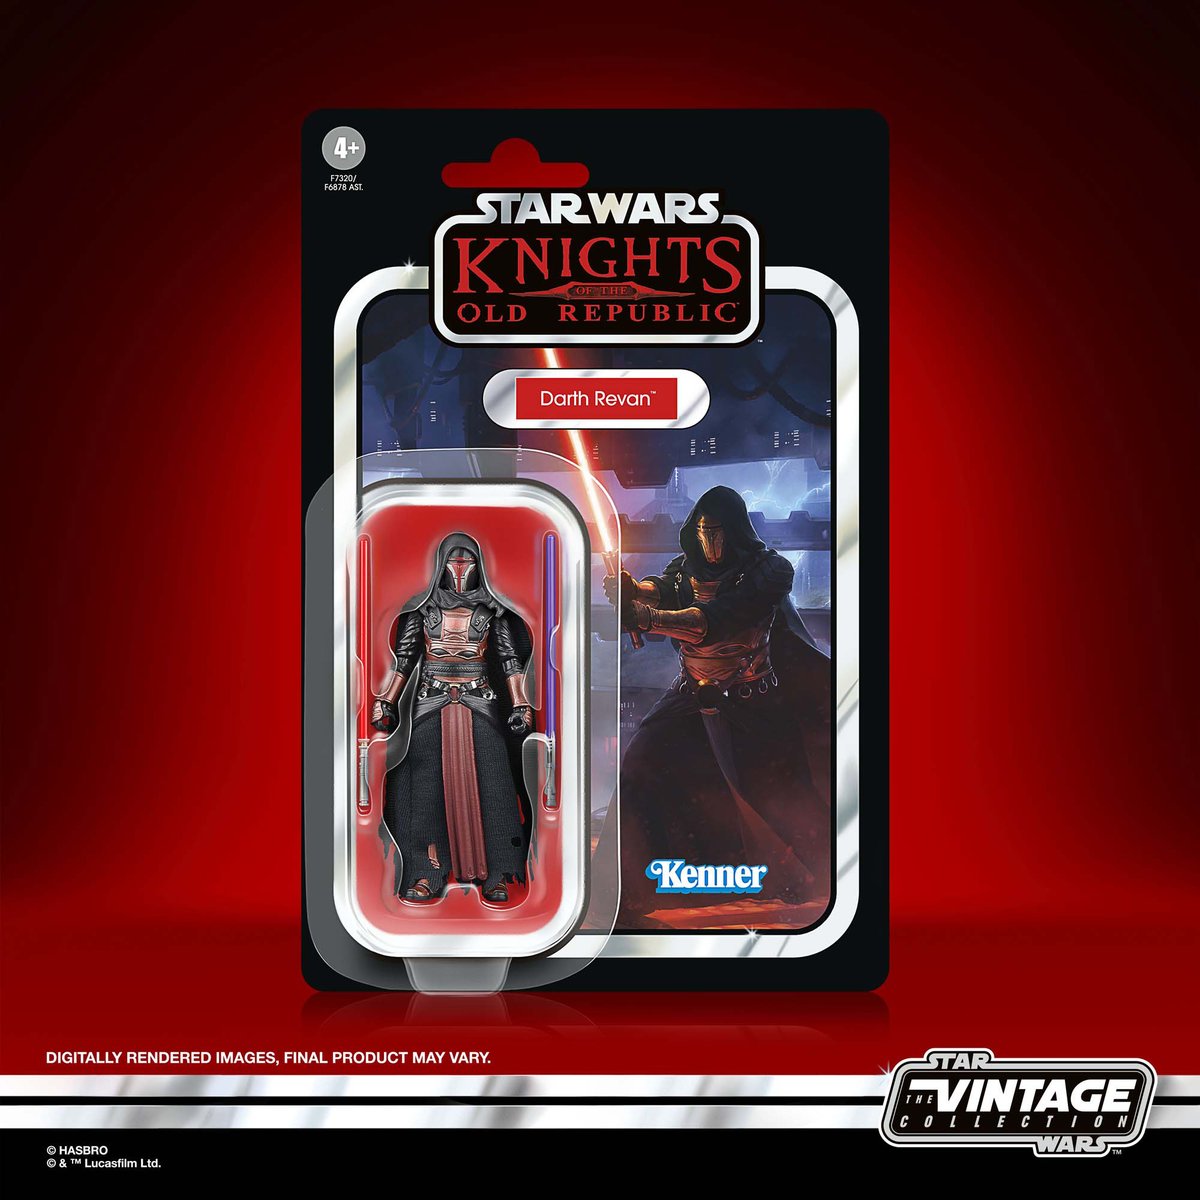 DARTH REVAN – Star Wars Vintage Collection – Knights of the Old Republic – VC301 >> HIER IM SHOP: toyjunkie.de/produkt/darth-…

#StarWarsVintageCollection #DarthRevan #KnightsOfTheOldRepublic #StarWarsToys #ActionFigures #ToyCollectors #ToyPhotography #GeekCollectibles